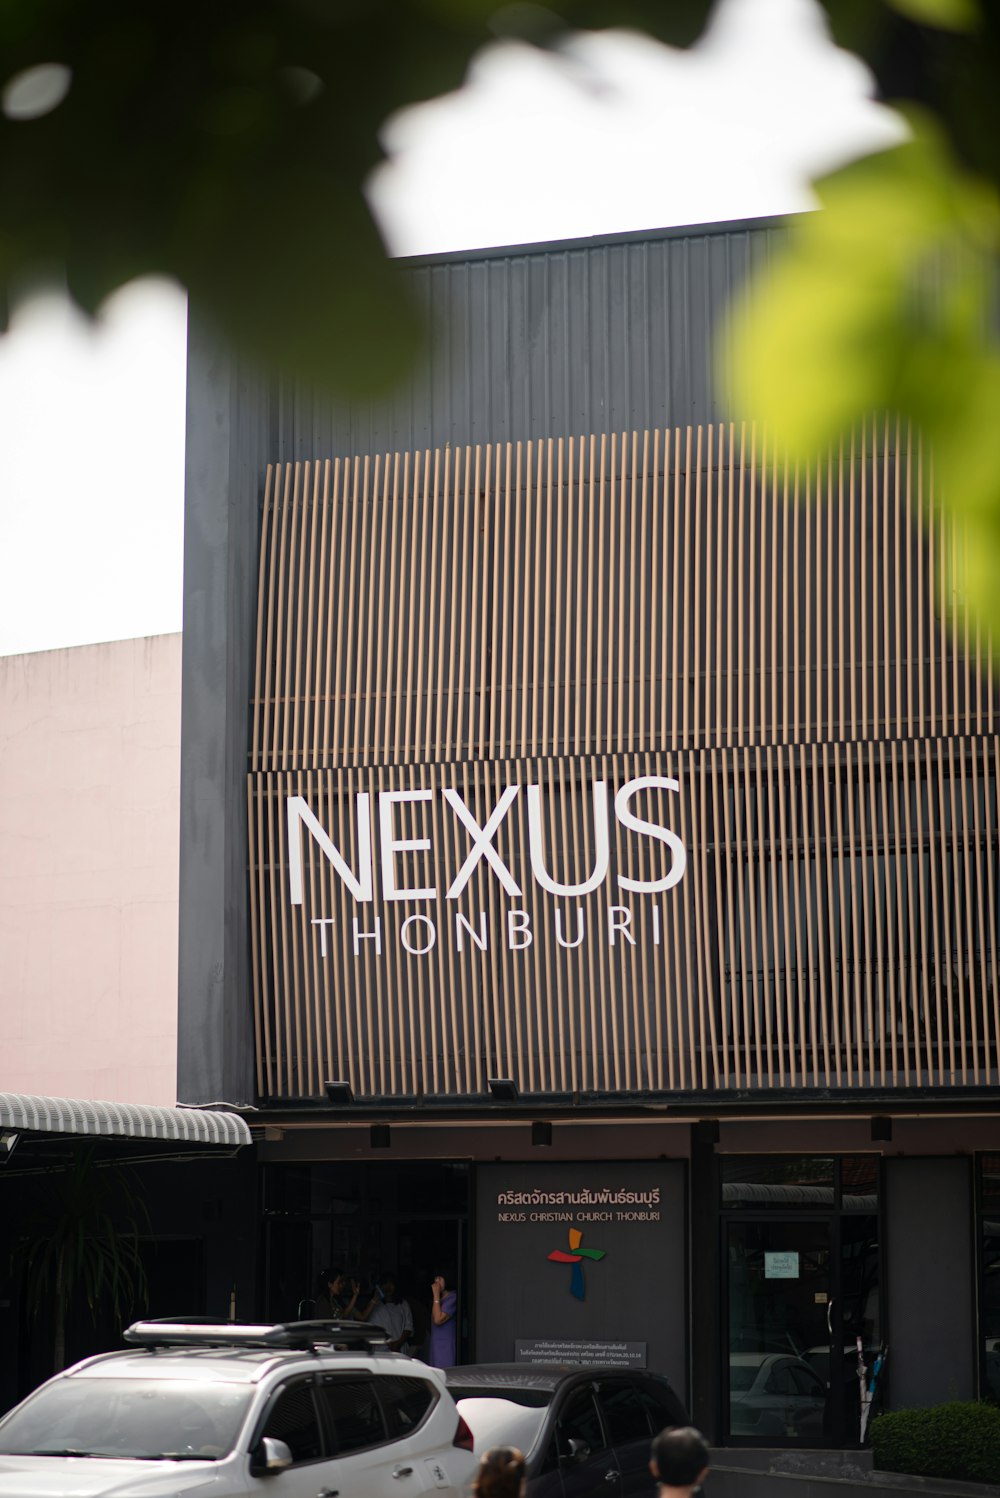 a building with a sign that says nexus house